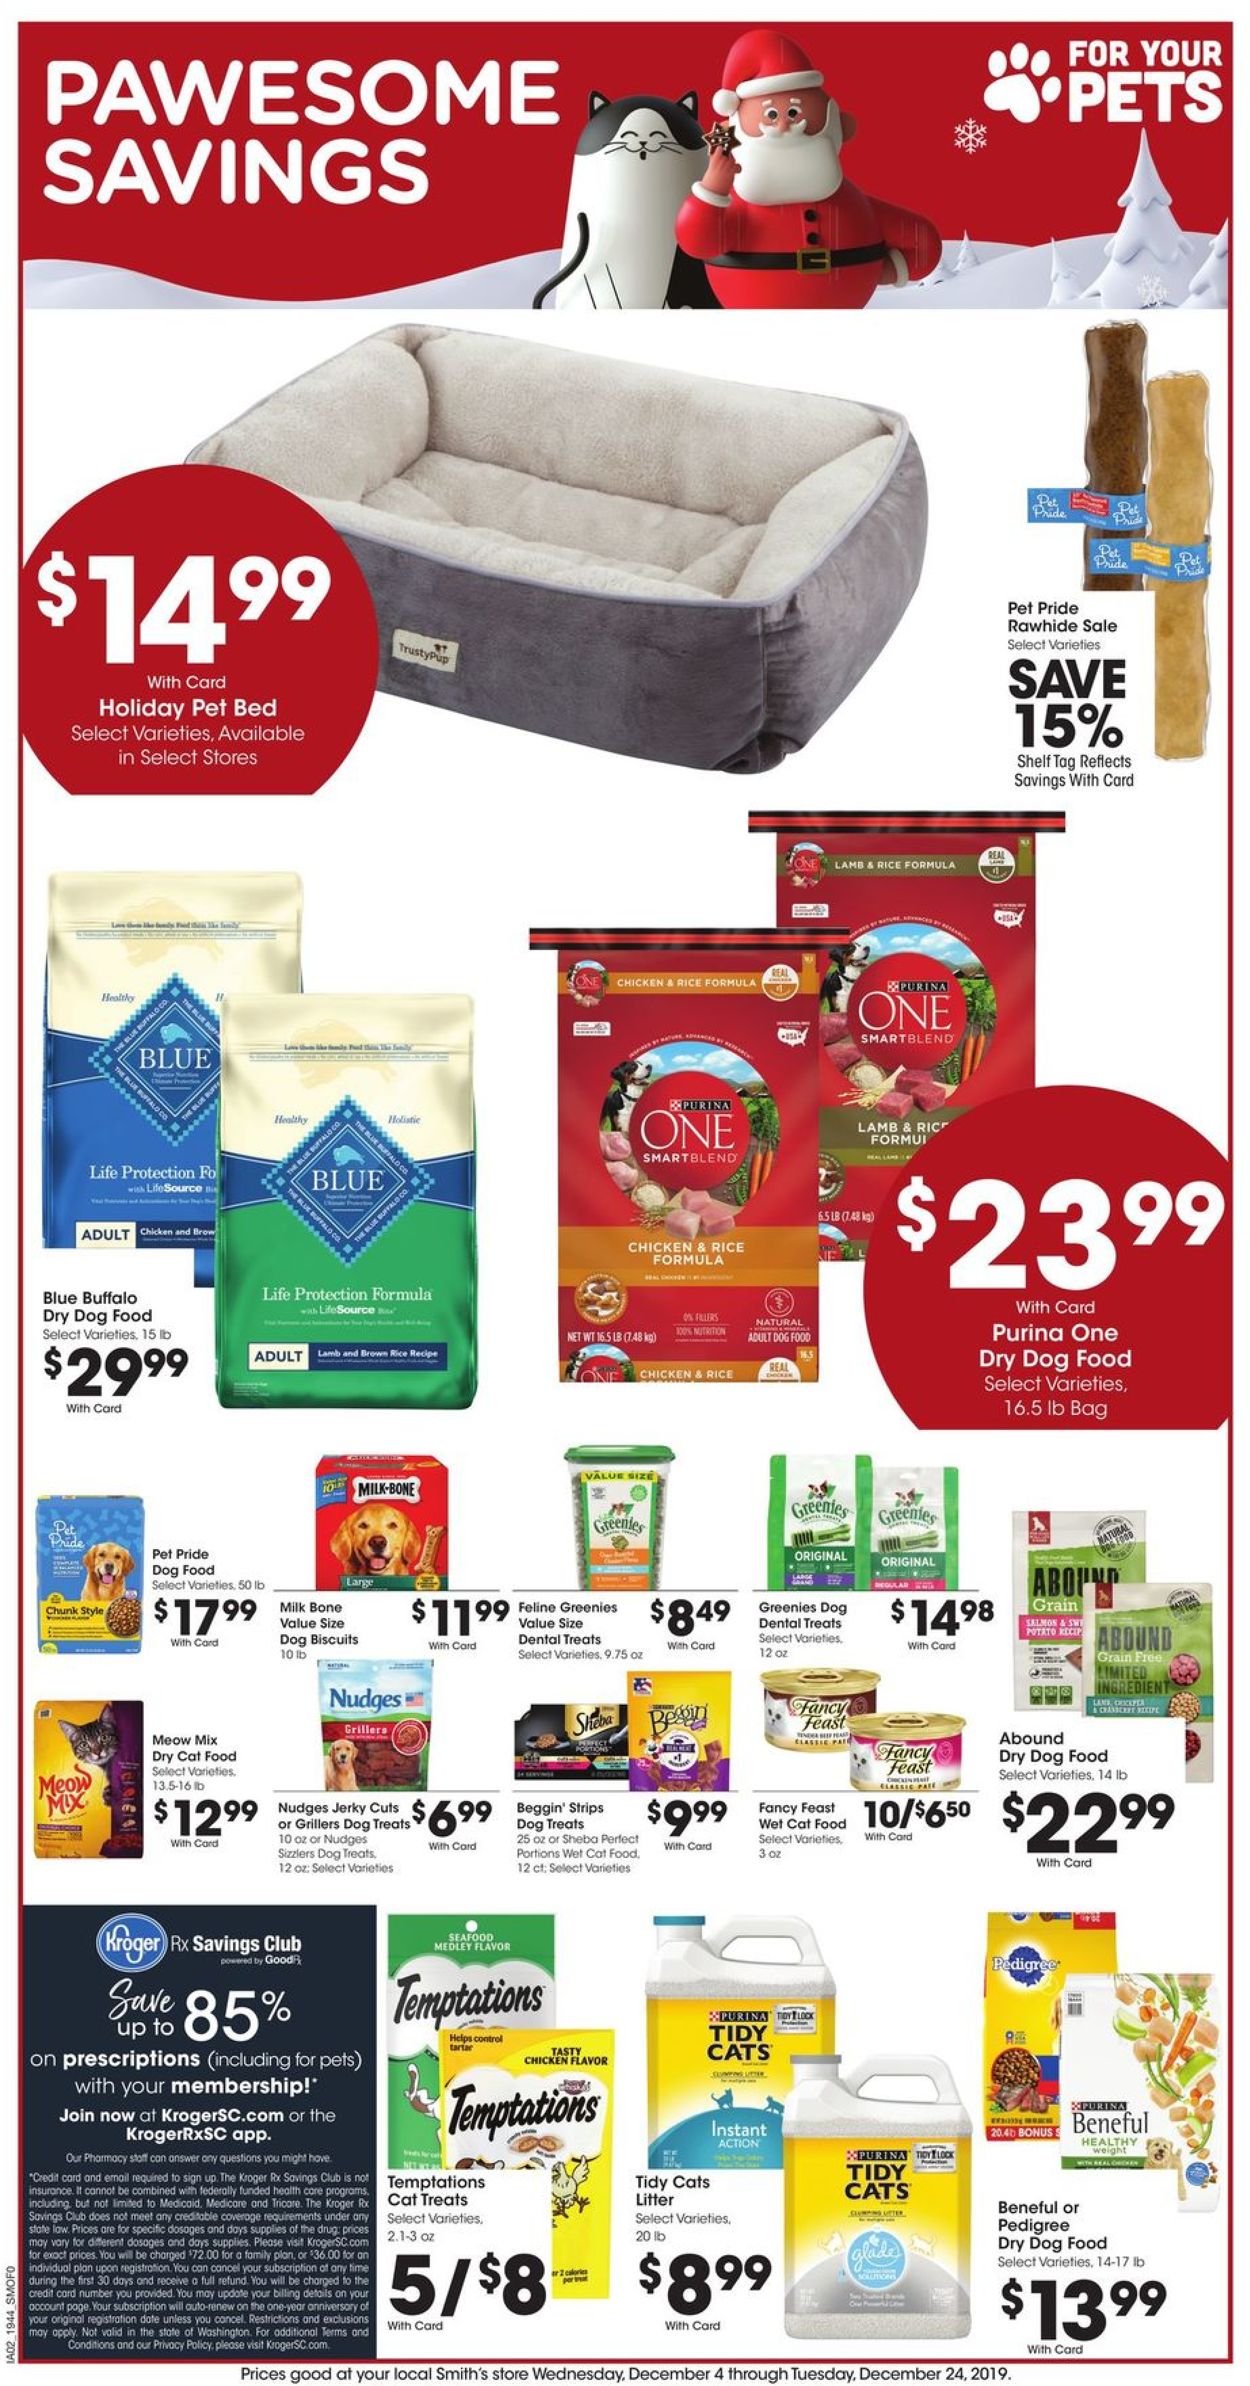 Catalogue Smith's - Christmas Ad 2019 from 12/18/2019